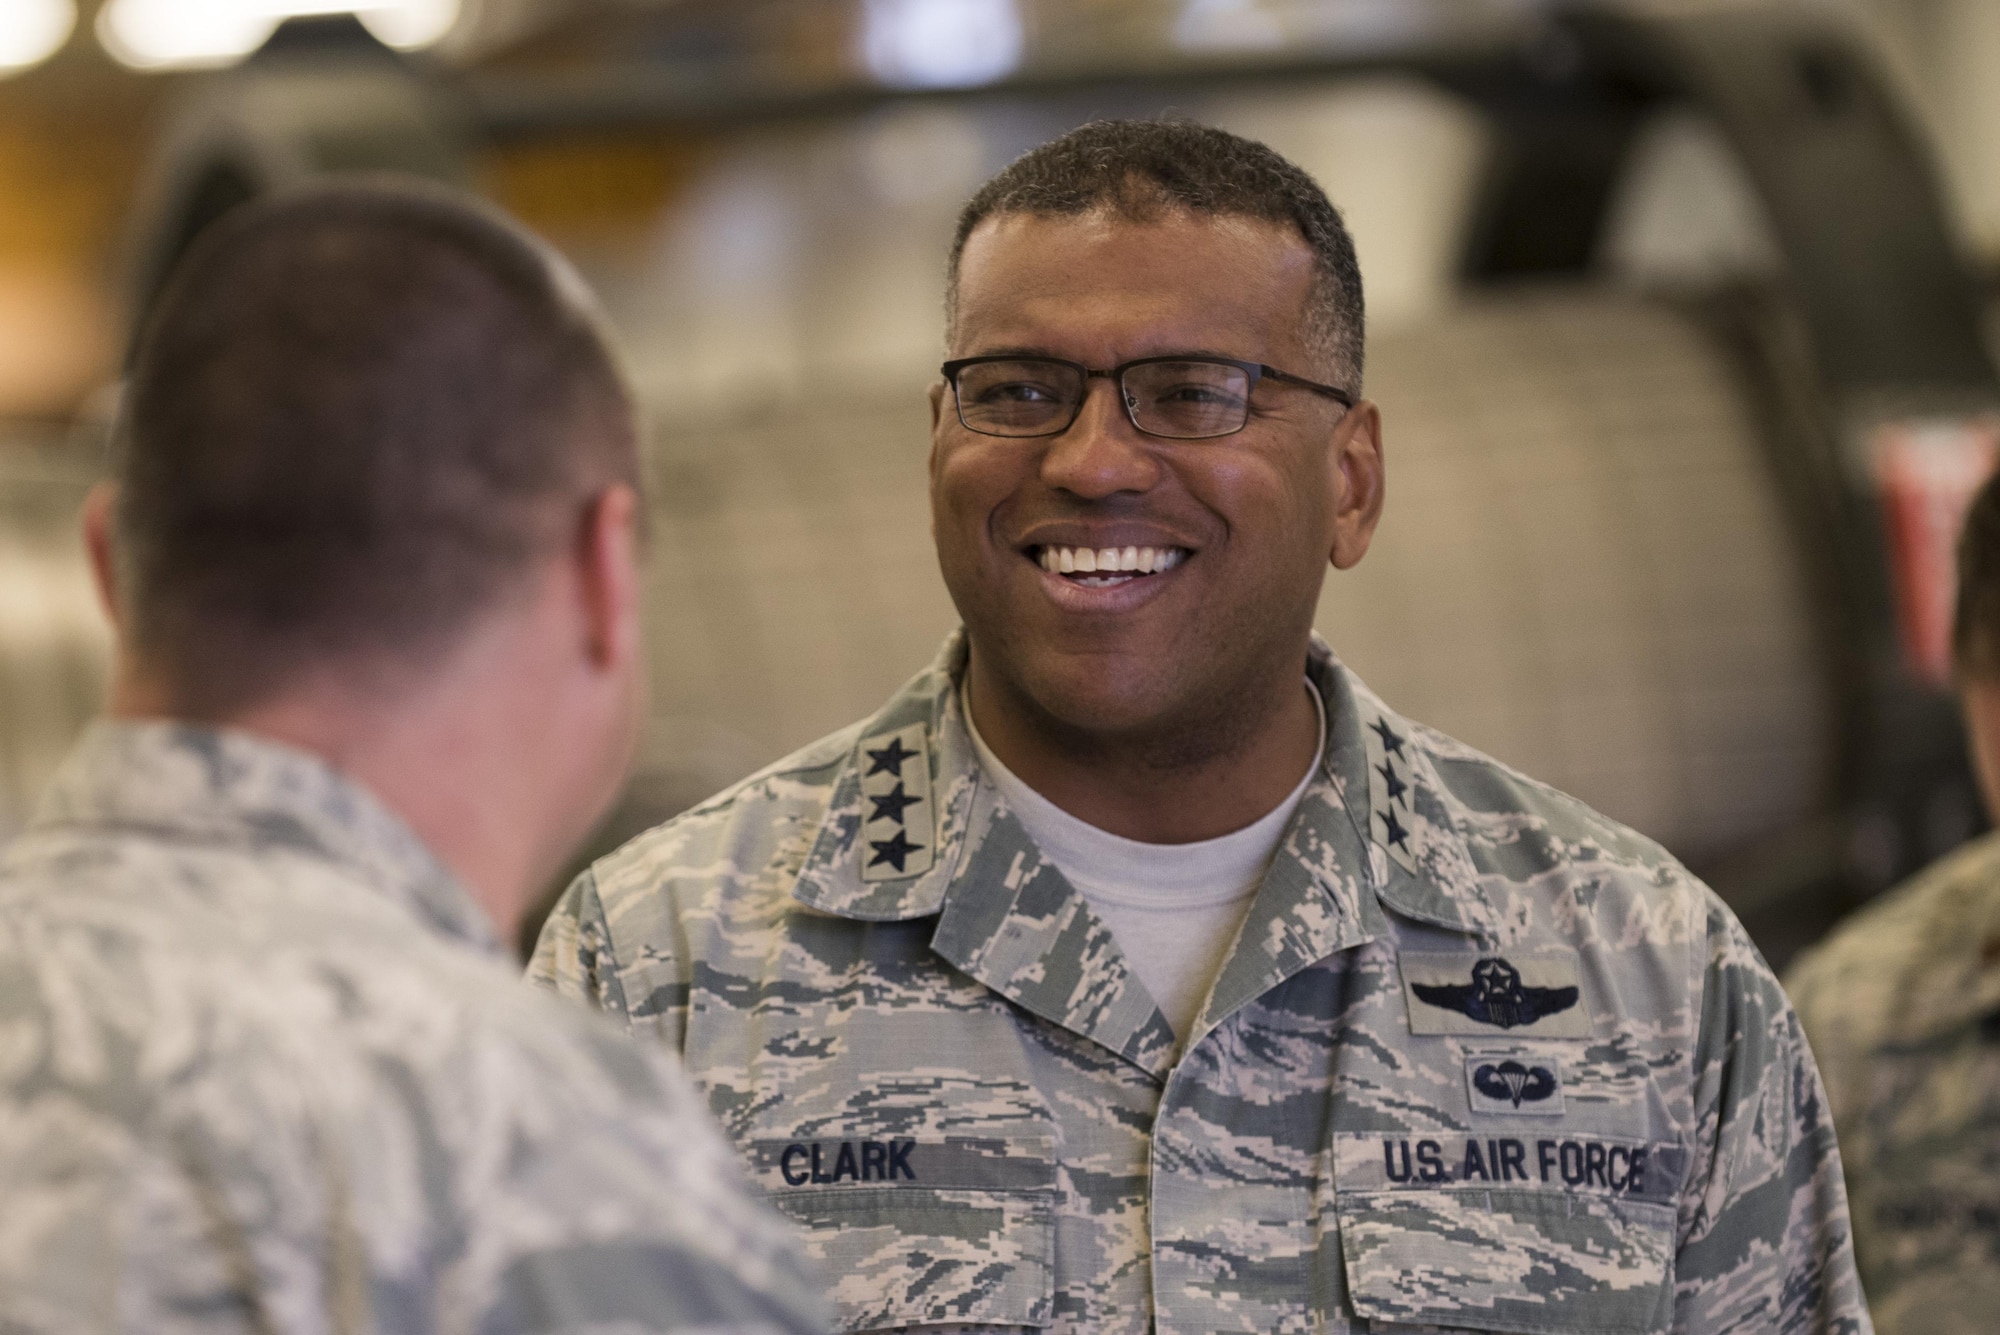 U.S. Air Force Lt. Gen. Richard M. Clark, 3rd Air Force and 17th Expeditionary Air Force commander, smiles during a base familiarization tour at Spangdahlem Air Base, Dec. 14, 2016. His tour included a breakfast and lunch with outstanding performers, a brief about the wing’s accomplishments, a sneak peek at base renovations and an all call with nearly 500 Airmen. (U.S. Air Force photo by Airman 1st Class Preston Cherry)